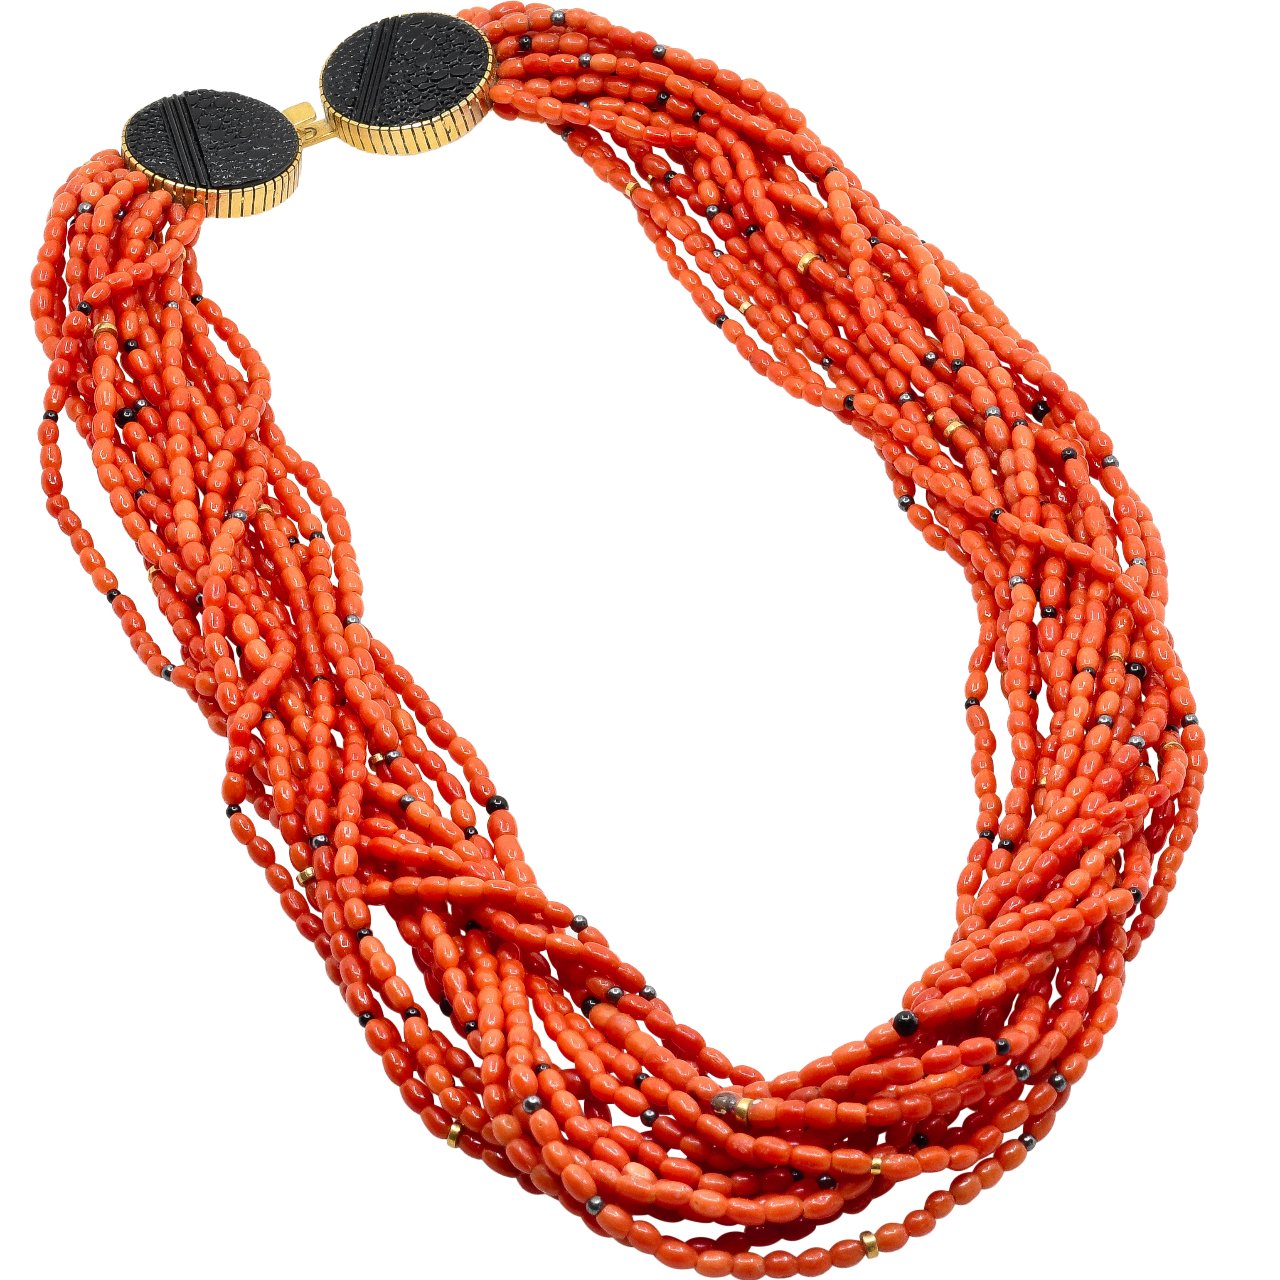 Gail Bird and Yazzie Johnson Necklace 16 Strands Natural Mediterranean Coral - Turquoise & Tufa